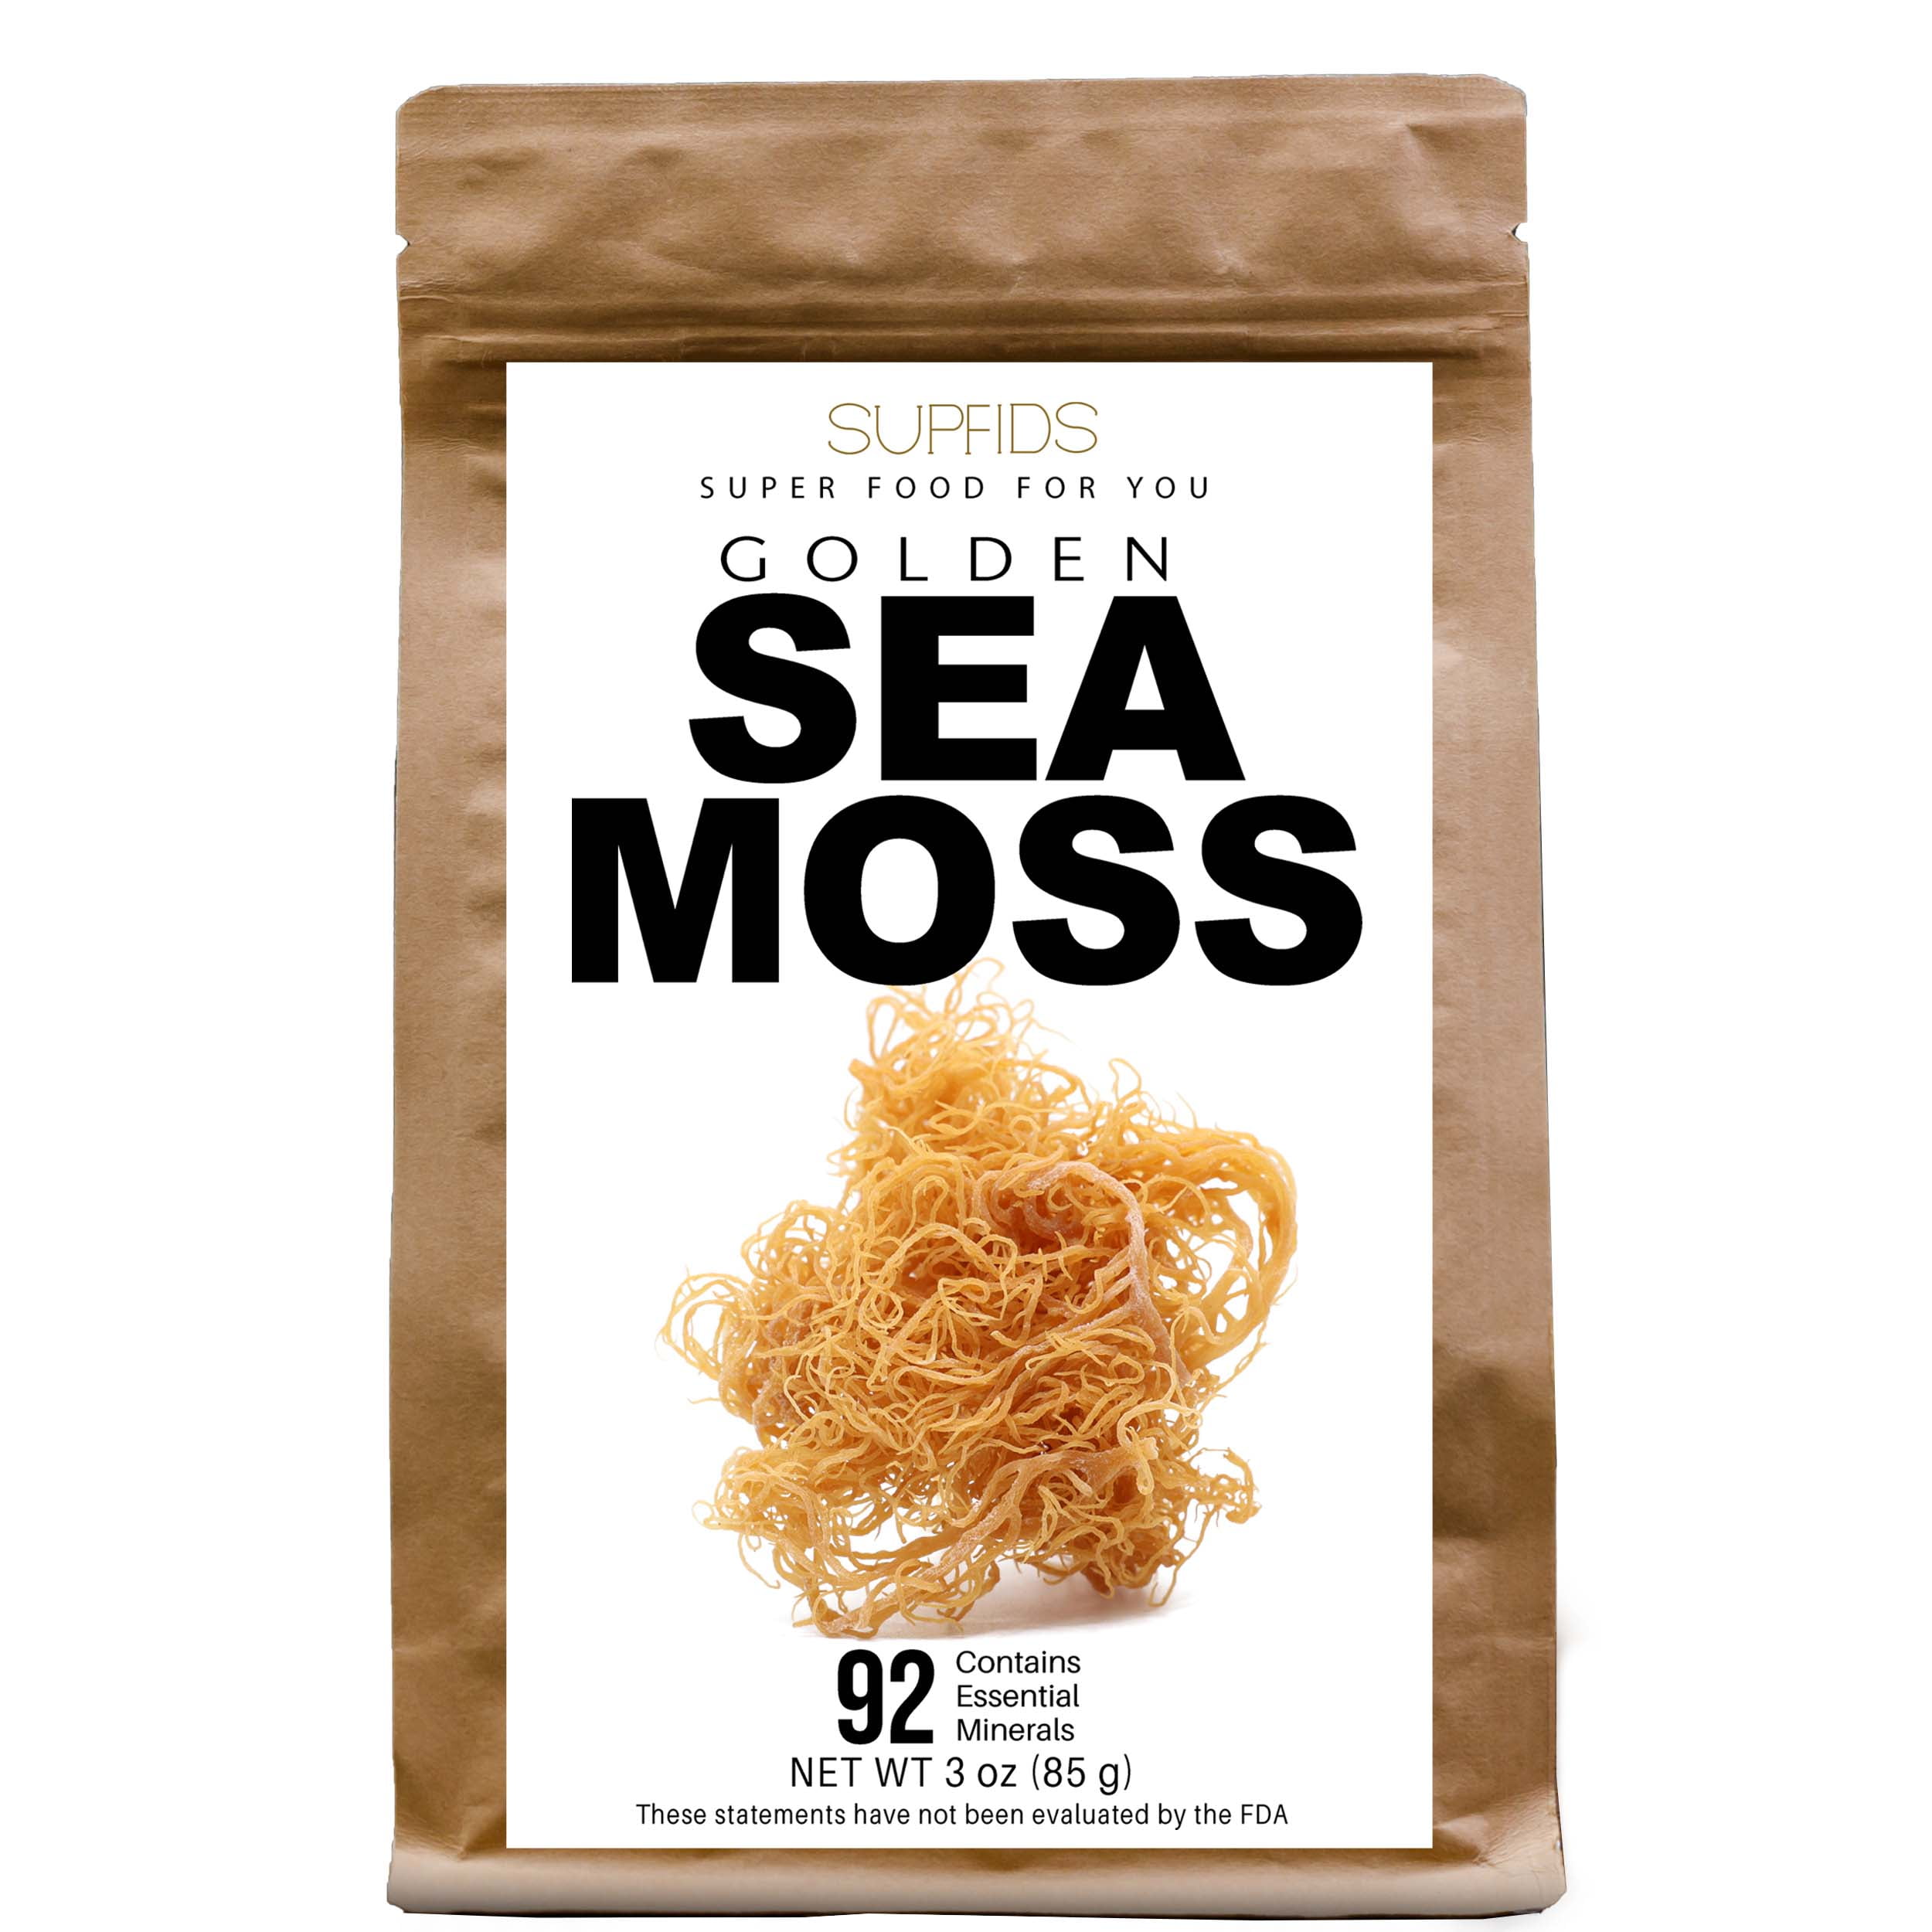 Golden Sea Moss Pure and Sun-dried Wildcrafted | Makes 36 oz of Gel ...